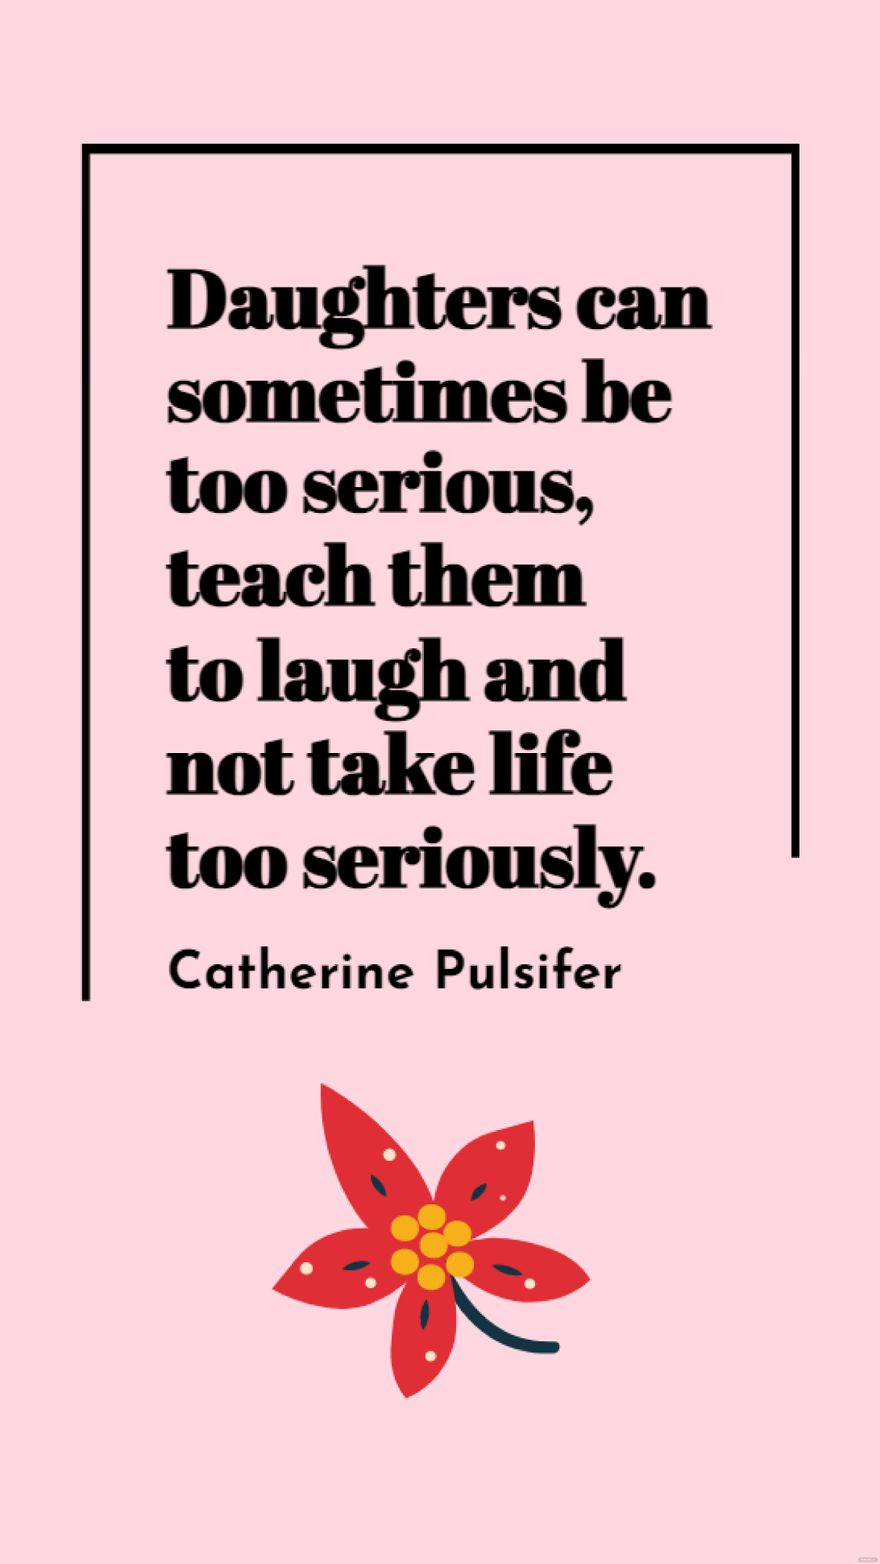 Catherine Pulsifer - Daughters can sometimes be too serious, teach them to laugh and not take life too seriously.